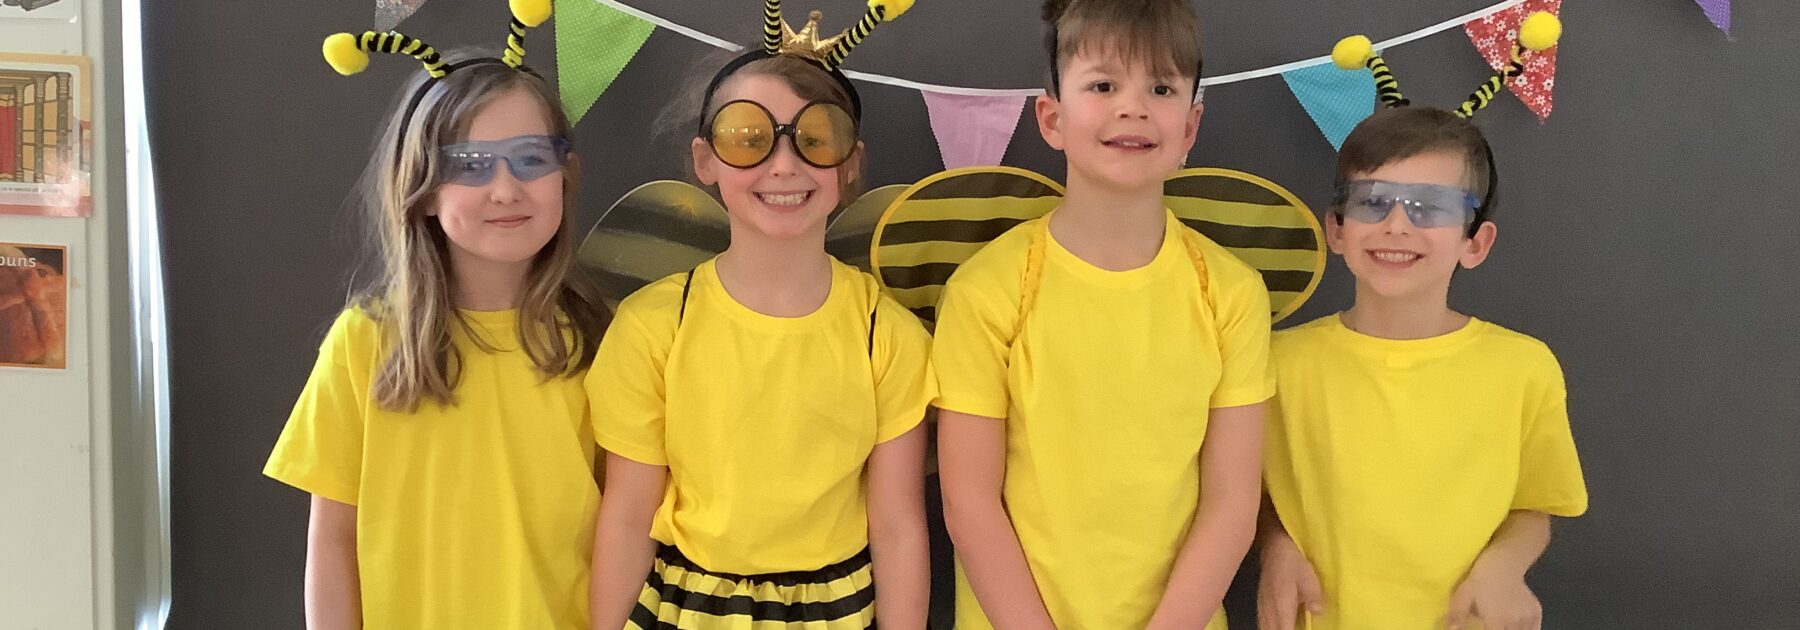 Year 4 Show Celebrates Bees